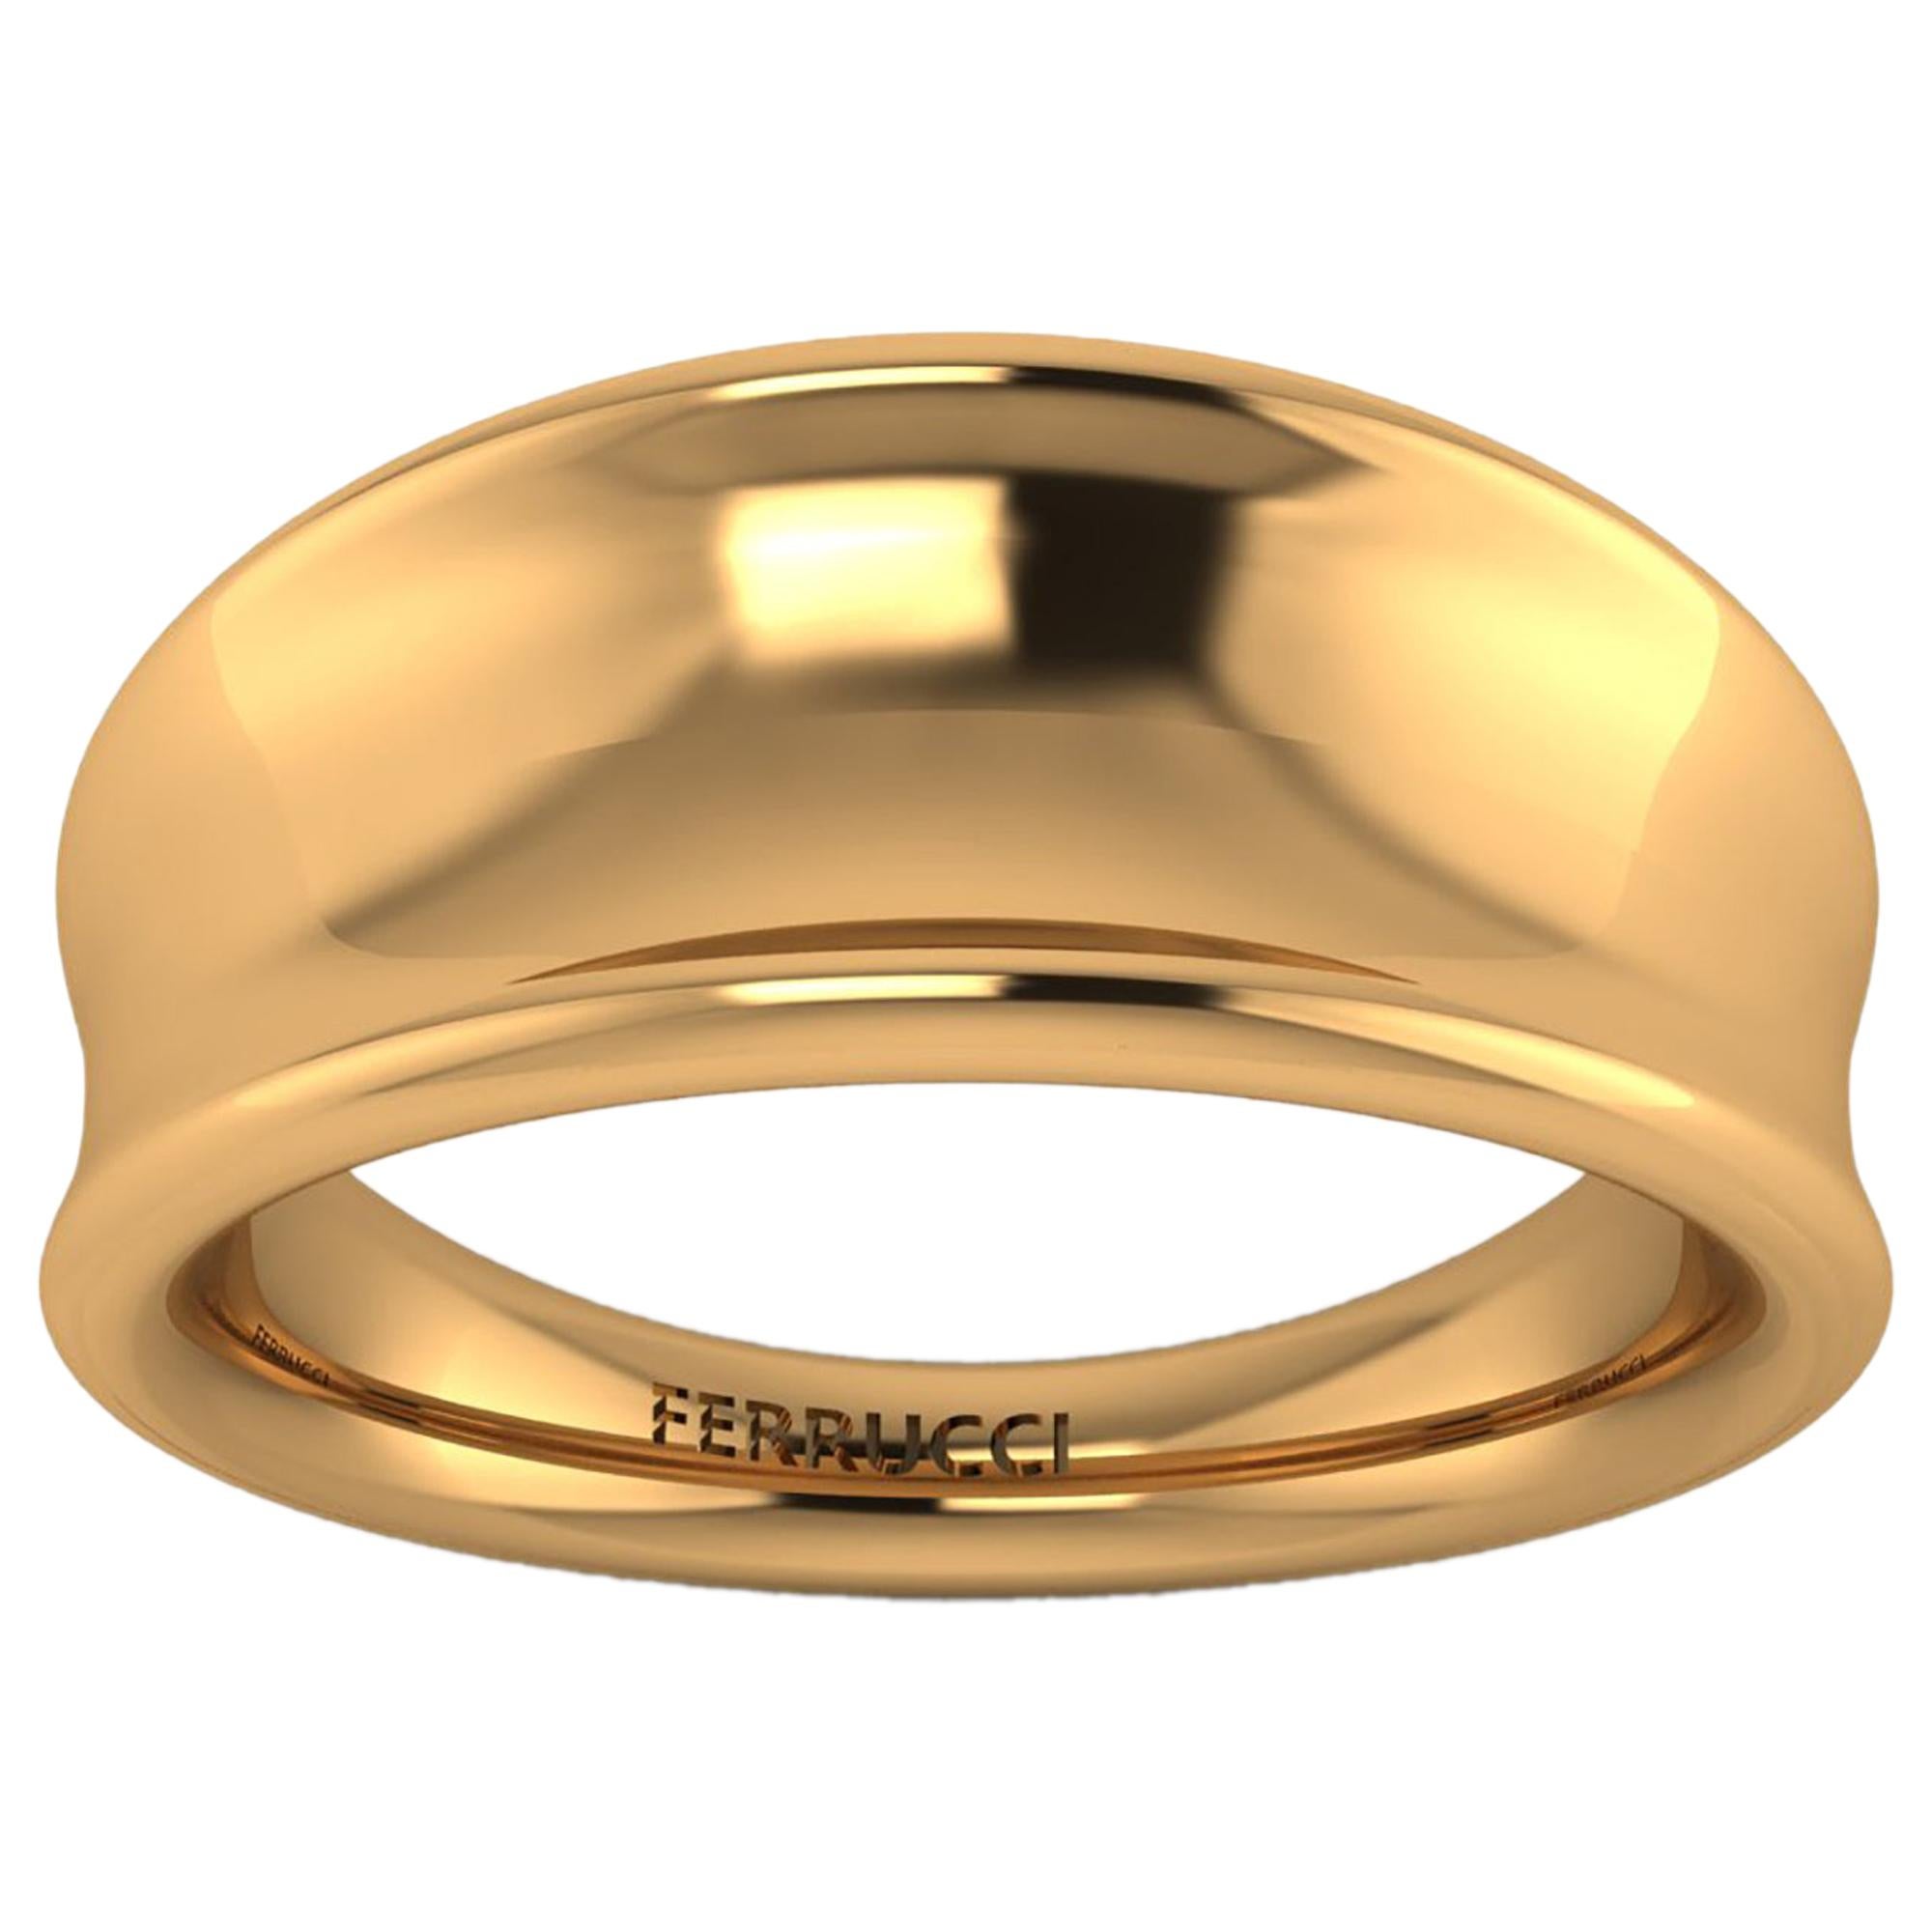 18 Karat Solid Yellow Gold Curved Organic Band